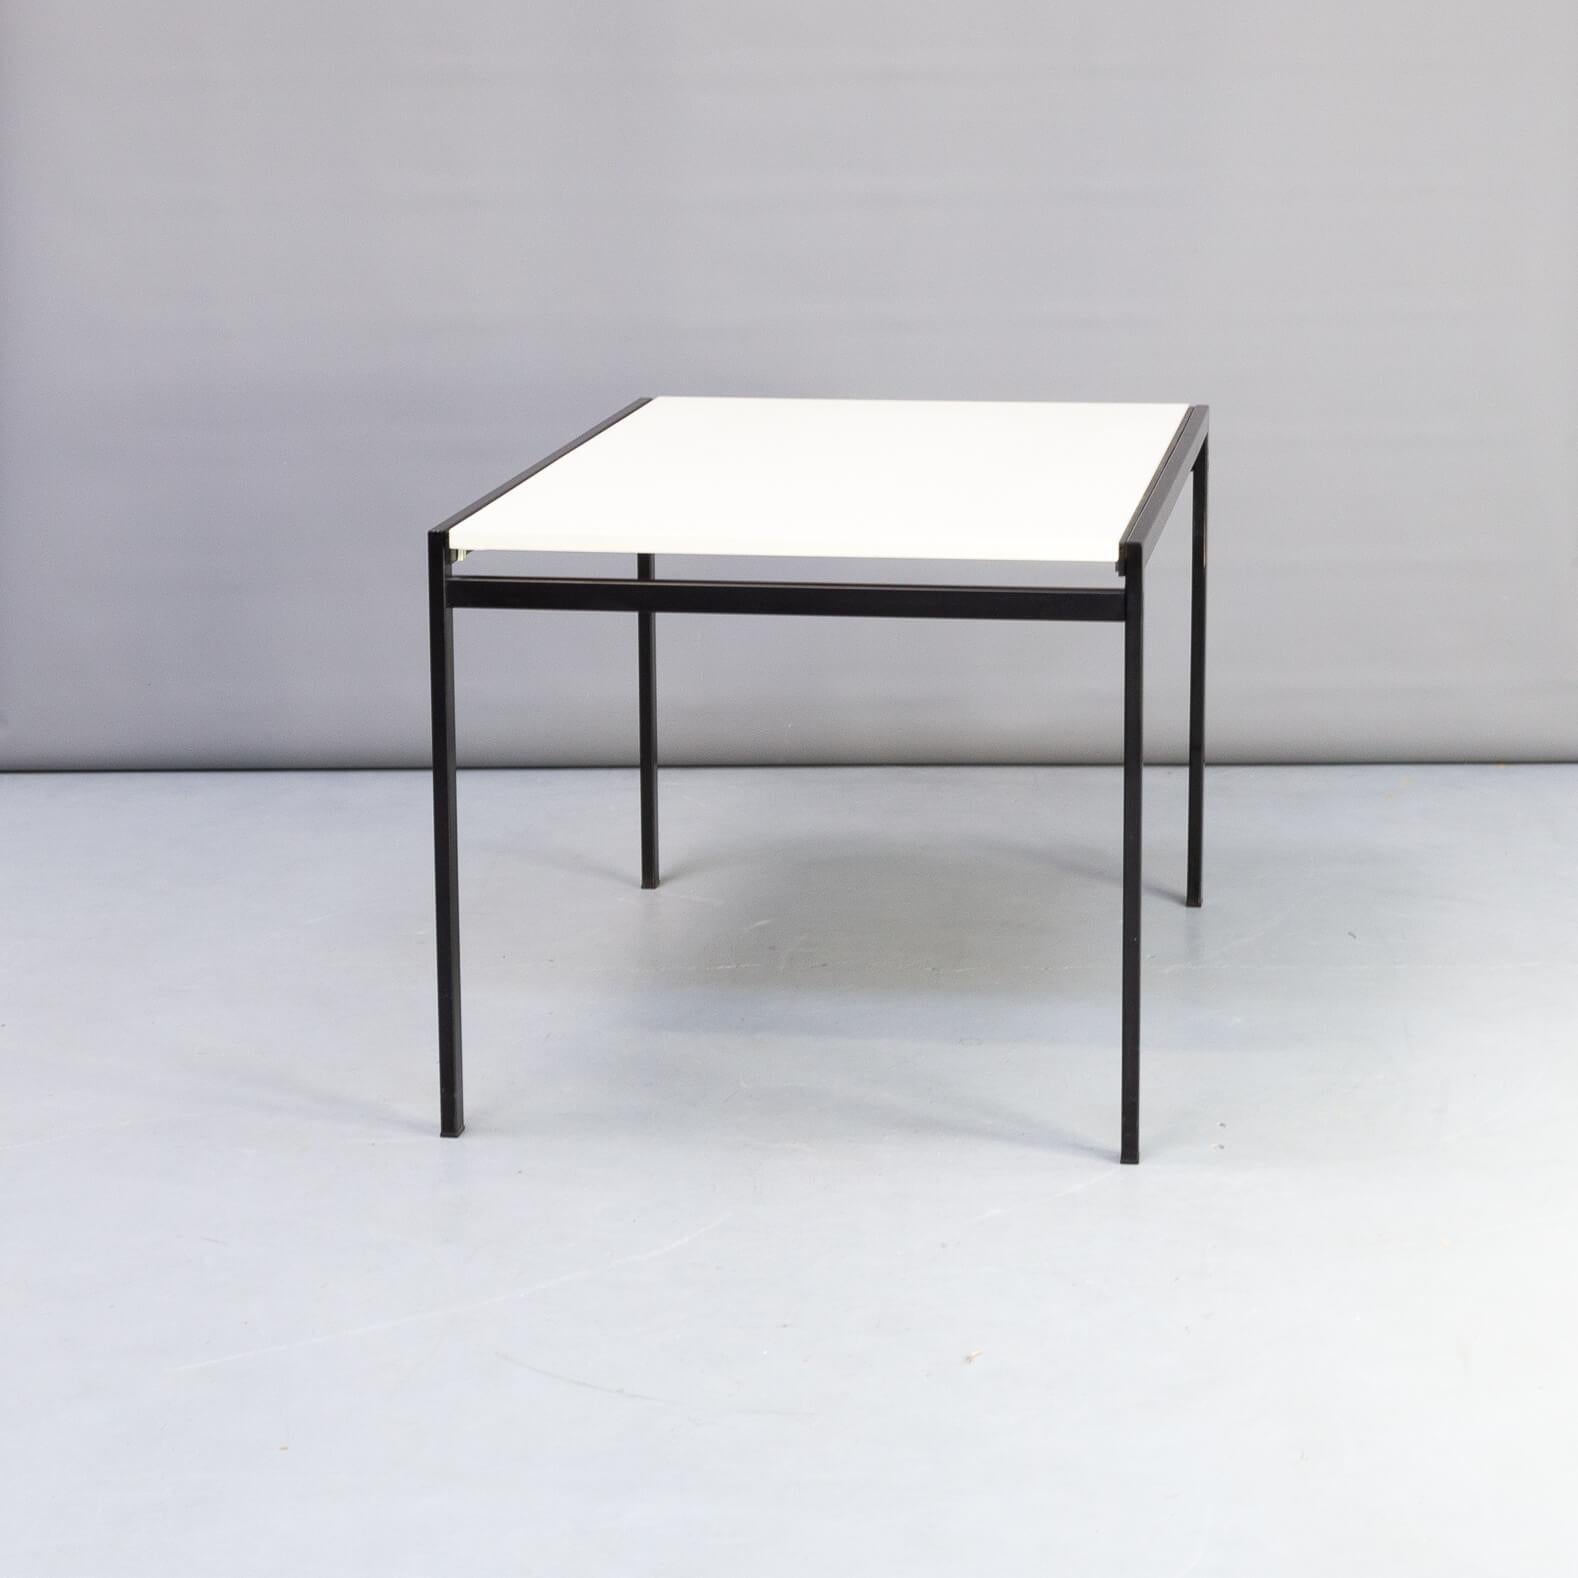 In 1958, Braakman designed the ‘Japanese Series’. The series derives it’s name from the clean and angular outside lines that brings to mind traditional Japanese designs. The TU30 dining table has a hidden extra table top, to be pulled up from